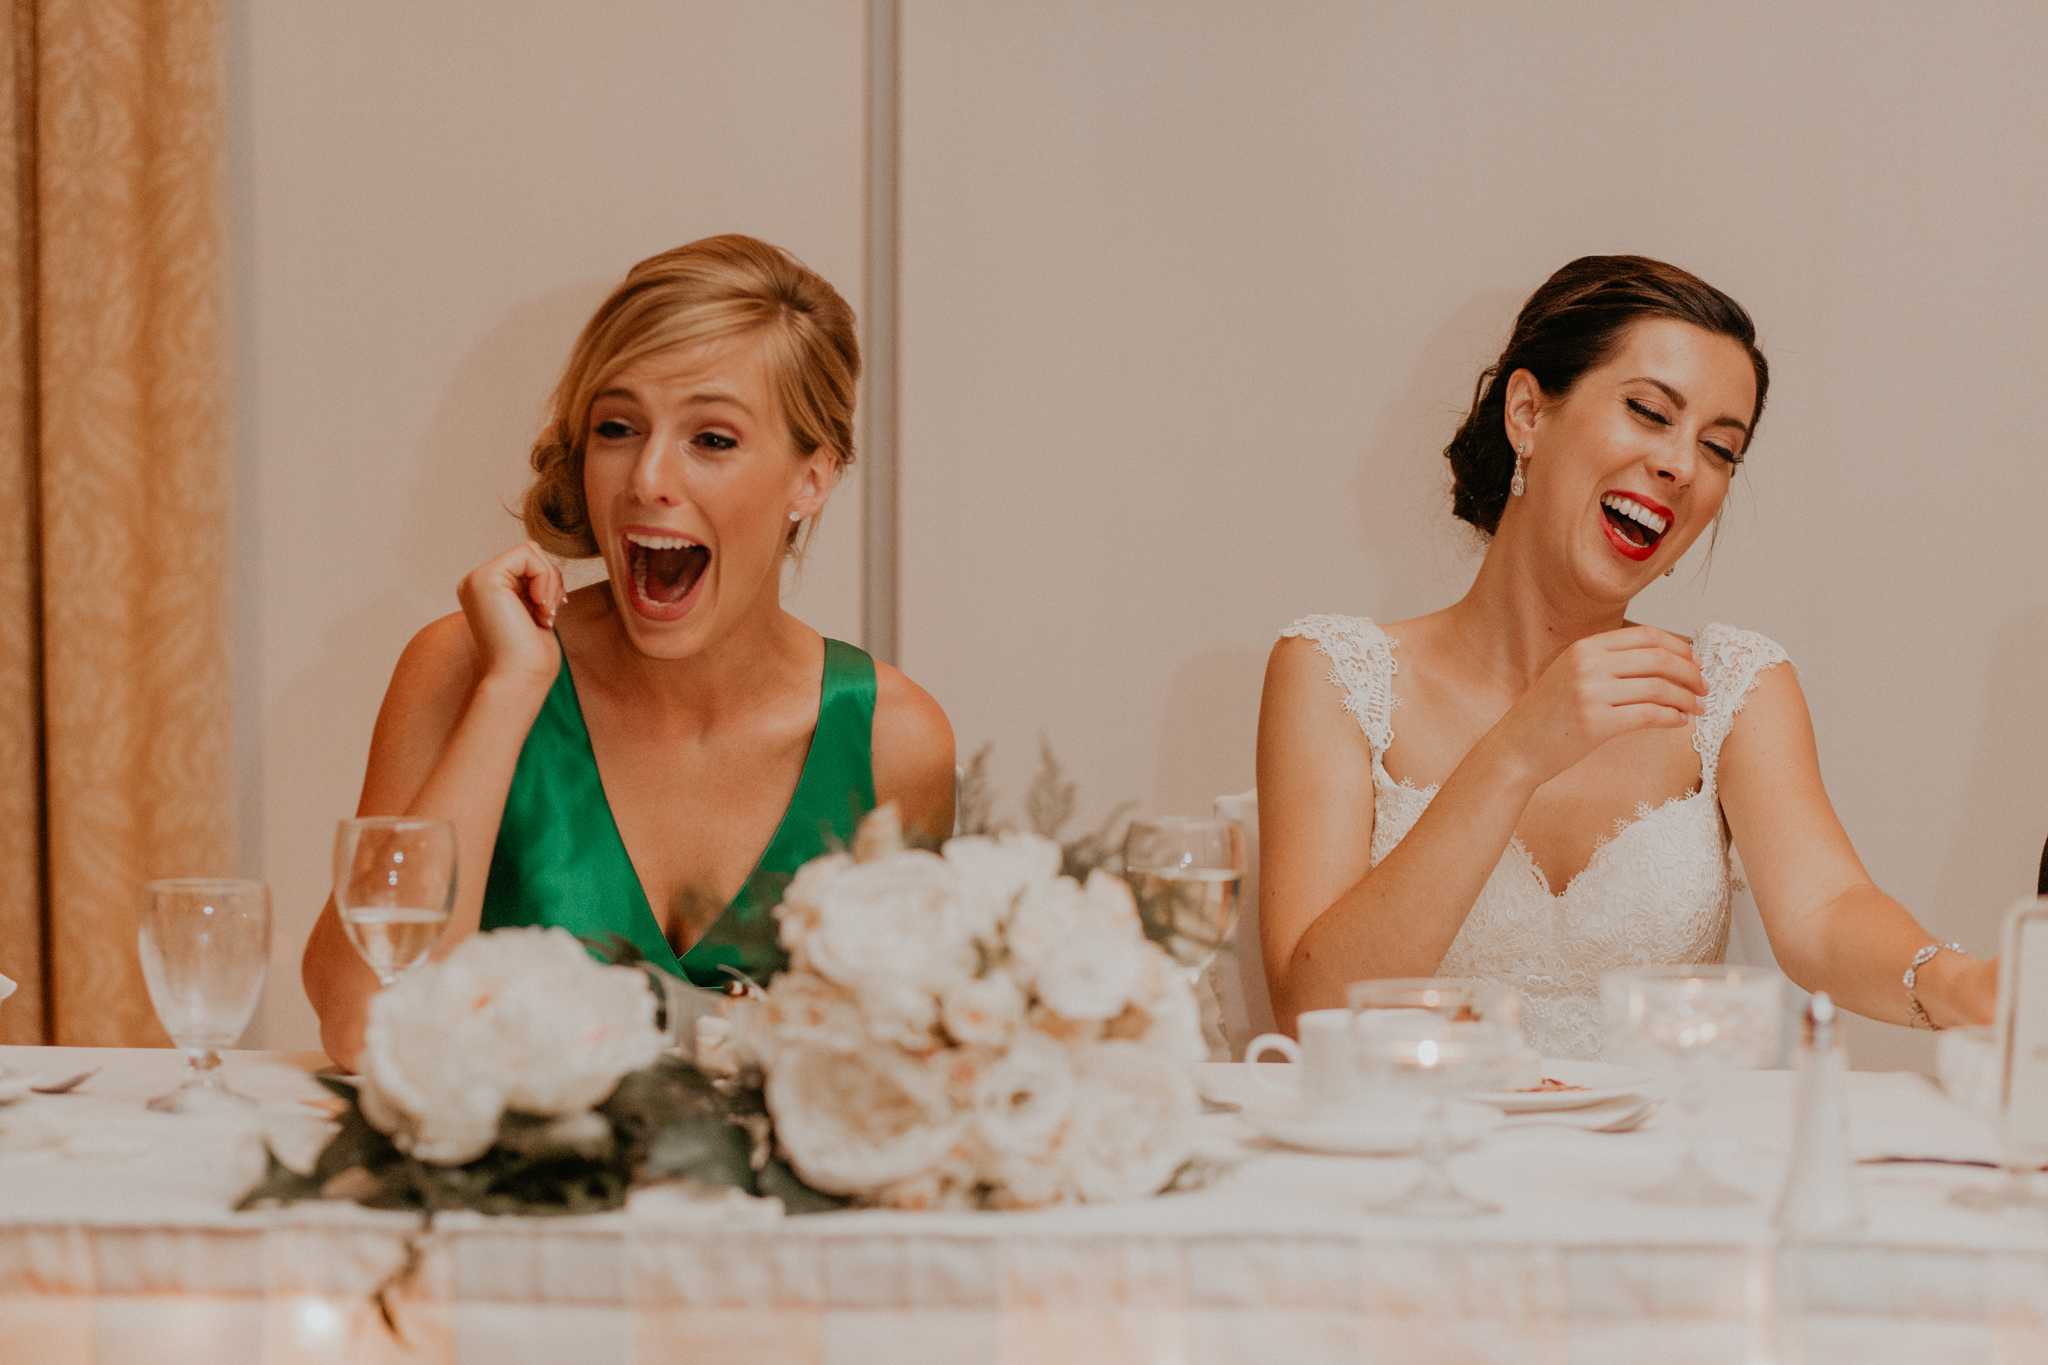 Candid of bride and bridesmaid laughing during wedding reception speeches